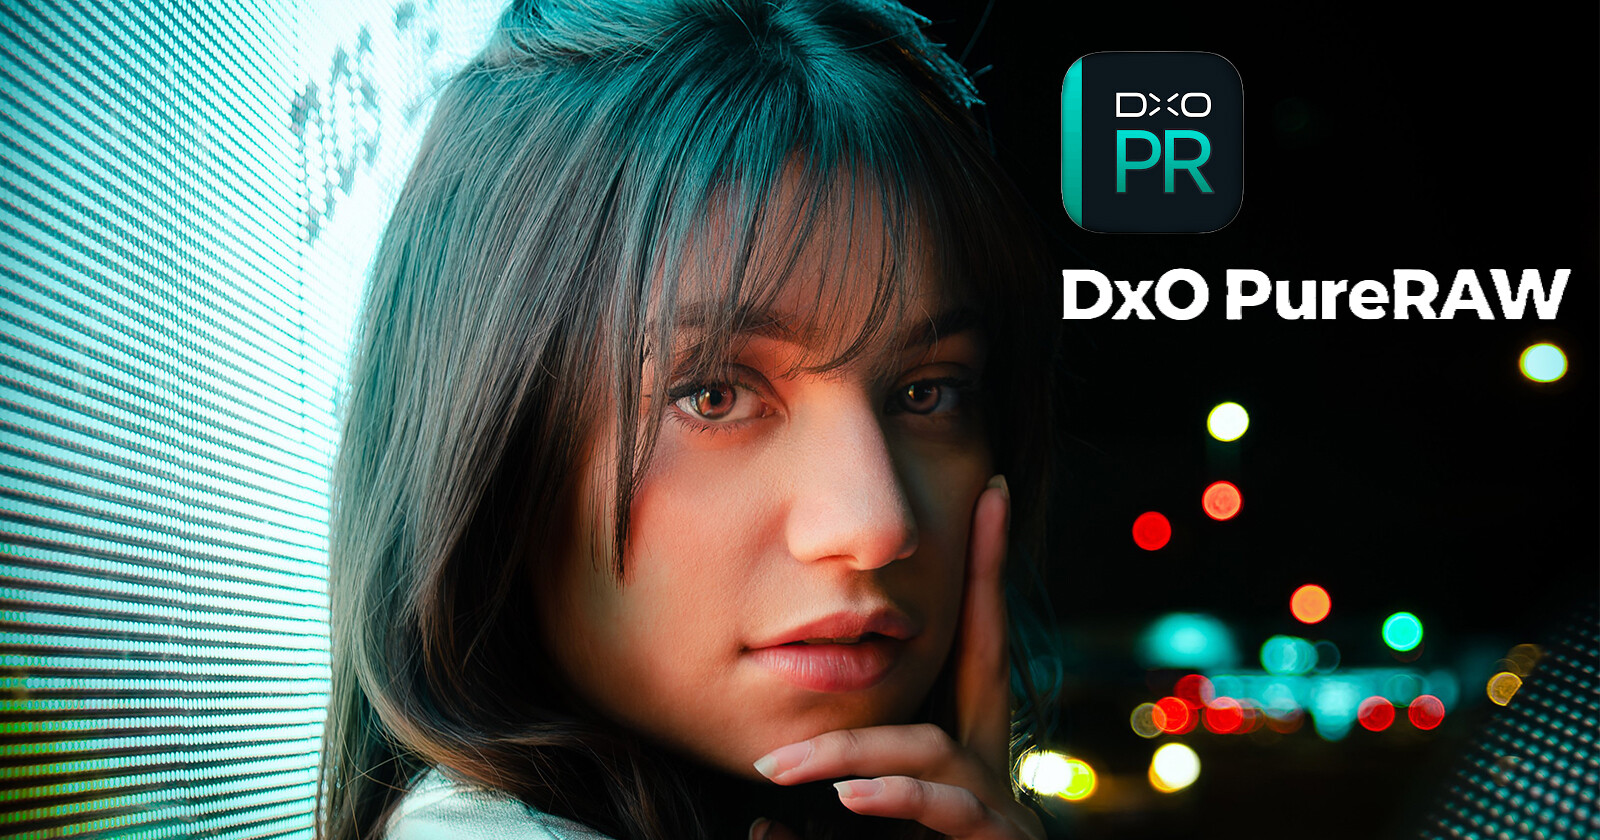  dxo pureraw adds powerful noise reduction 